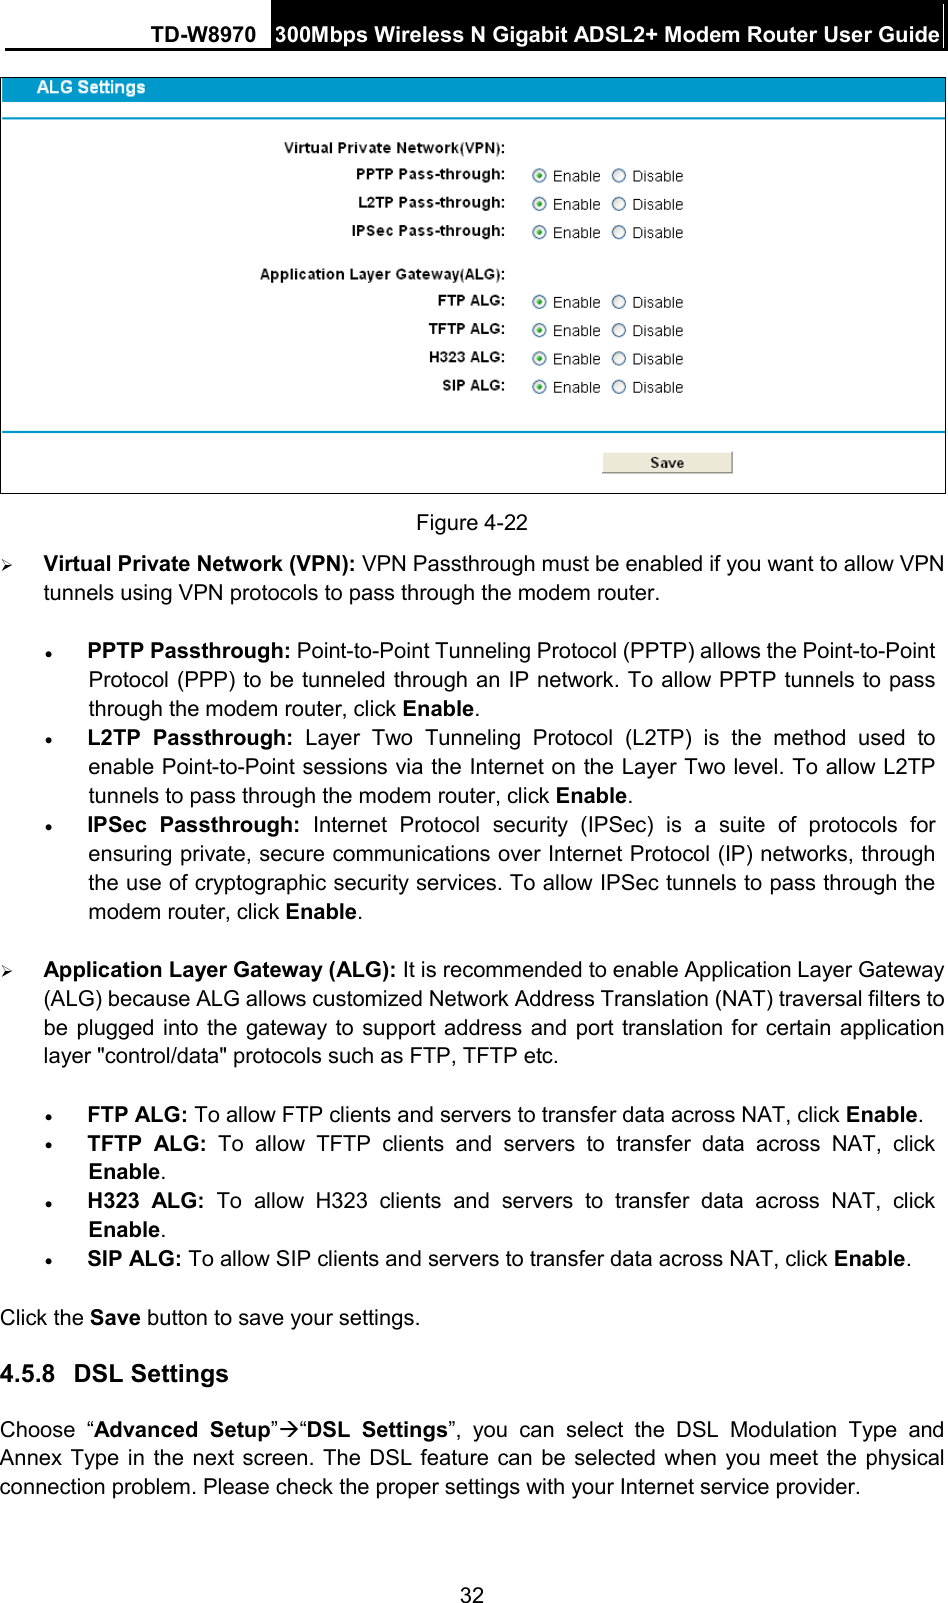 TD-W8970 300Mbps Wireless N Gigabit ADSL2+ Modem Router User Guide   Figure 4-22  Virtual Private Network (VPN): VPN Passthrough must be enabled if you want to allow VPN tunnels using VPN protocols to pass through the modem router. • PPTP Passthrough: Point-to-Point Tunneling Protocol (PPTP) allows the Point-to-Point Protocol (PPP) to be tunneled through an IP network. To allow PPTP tunnels to pass through the modem router, click Enable. • L2TP Passthrough: Layer Two Tunneling Protocol (L2TP) is the method used to enable Point-to-Point sessions via the Internet on the Layer Two level. To allow L2TP tunnels to pass through the modem router, click Enable. • IPSec Passthrough: Internet Protocol security (IPSec) is a suite of protocols for ensuring private, secure communications over Internet Protocol (IP) networks, through the use of cryptographic security services. To allow IPSec tunnels to pass through the modem router, click Enable.  Application Layer Gateway (ALG): It is recommended to enable Application Layer Gateway (ALG) because ALG allows customized Network Address Translation (NAT) traversal filters to be plugged into the gateway to support address and port translation for certain application layer &quot;control/data&quot; protocols such as FTP, TFTP etc.   • FTP ALG: To allow FTP clients and servers to transfer data across NAT, click Enable. • TFTP ALG: To allow TFTP clients and servers to transfer data across NAT, click Enable. • H323 ALG:  To allow H323 clients and servers to transfer data across NAT, click Enable. • SIP ALG: To allow SIP clients and servers to transfer data across NAT, click Enable. Click the Save button to save your settings. 4.5.8 DSL Settings Choose  “Advanced Setup”“DSL Settings”, you can select the DSL Modulation  Type and Annex Type in the next screen. The DSL feature can be selected when you meet the physical connection problem. Please check the proper settings with your Internet service provider. 32 